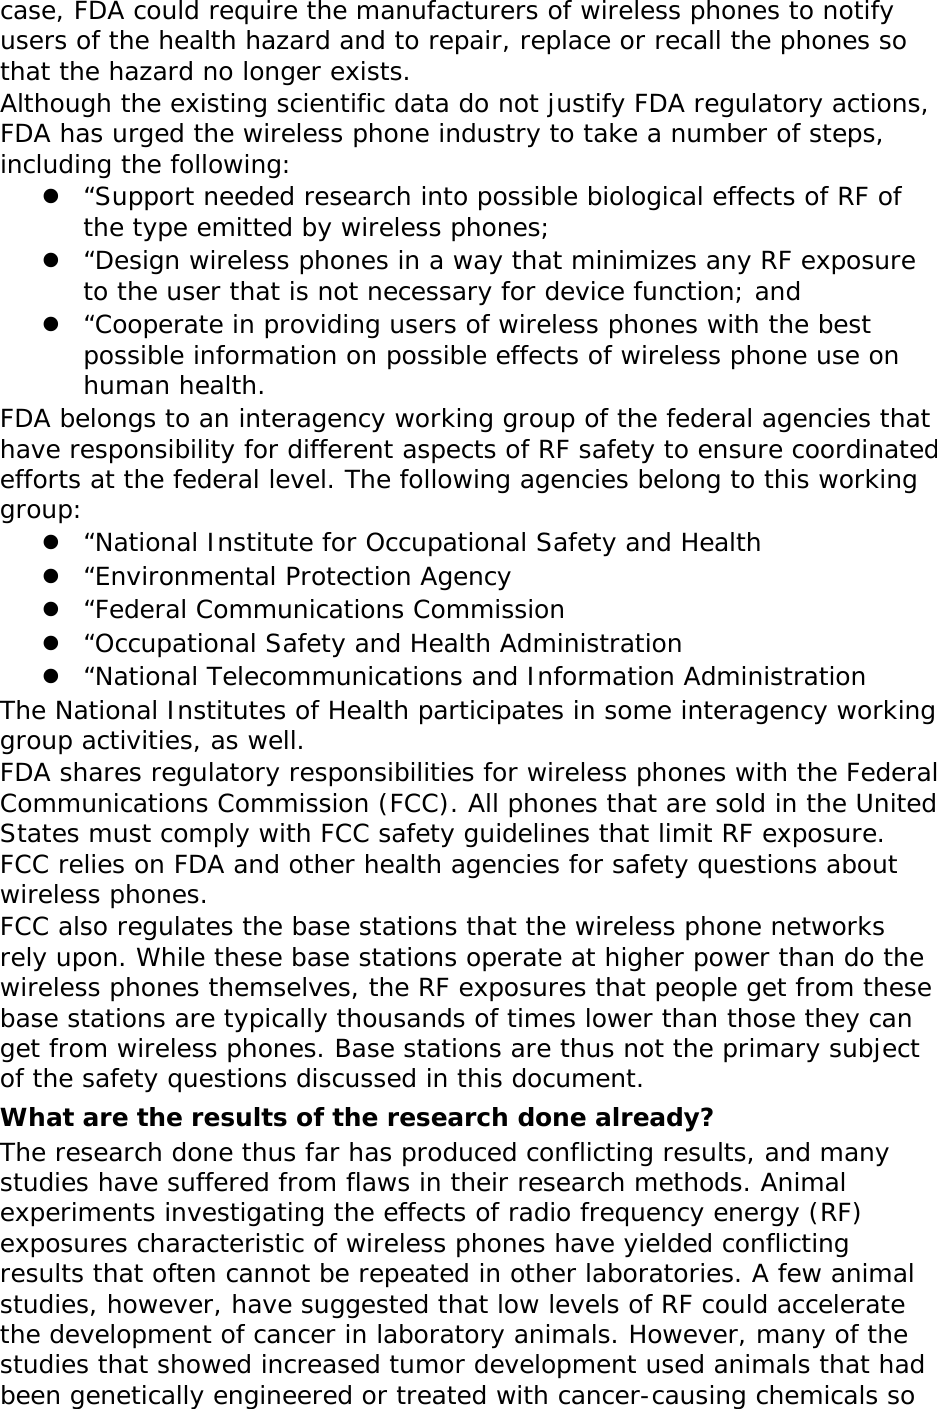 case, FDA could require the manufacturers of wireless phones to notify users of the health hazard and to repair, replace or recall the phones so that the hazard no longer exists. Although the existing scientific data do not justify FDA regulatory actions, FDA has urged the wireless phone industry to take a number of steps, including the following:  “Support needed research into possible biological effects of RF of the type emitted by wireless phones;  “Design wireless phones in a way that minimizes any RF exposure to the user that is not necessary for device function; and  “Cooperate in providing users of wireless phones with the best possible information on possible effects of wireless phone use on human health. FDA belongs to an interagency working group of the federal agencies that have responsibility for different aspects of RF safety to ensure coordinated efforts at the federal level. The following agencies belong to this working group:  “National Institute for Occupational Safety and Health  “Environmental Protection Agency  “Federal Communications Commission  “Occupational Safety and Health Administration  “National Telecommunications and Information Administration The National Institutes of Health participates in some interagency working group activities, as well. FDA shares regulatory responsibilities for wireless phones with the Federal Communications Commission (FCC). All phones that are sold in the United States must comply with FCC safety guidelines that limit RF exposure. FCC relies on FDA and other health agencies for safety questions about wireless phones. FCC also regulates the base stations that the wireless phone networks rely upon. While these base stations operate at higher power than do the wireless phones themselves, the RF exposures that people get from these base stations are typically thousands of times lower than those they can get from wireless phones. Base stations are thus not the primary subject of the safety questions discussed in this document. What are the results of the research done already? The research done thus far has produced conflicting results, and many studies have suffered from flaws in their research methods. Animal experiments investigating the effects of radio frequency energy (RF) exposures characteristic of wireless phones have yielded conflicting results that often cannot be repeated in other laboratories. A few animal studies, however, have suggested that low levels of RF could accelerate the development of cancer in laboratory animals. However, many of the studies that showed increased tumor development used animals that had been genetically engineered or treated with cancer-causing chemicals so 